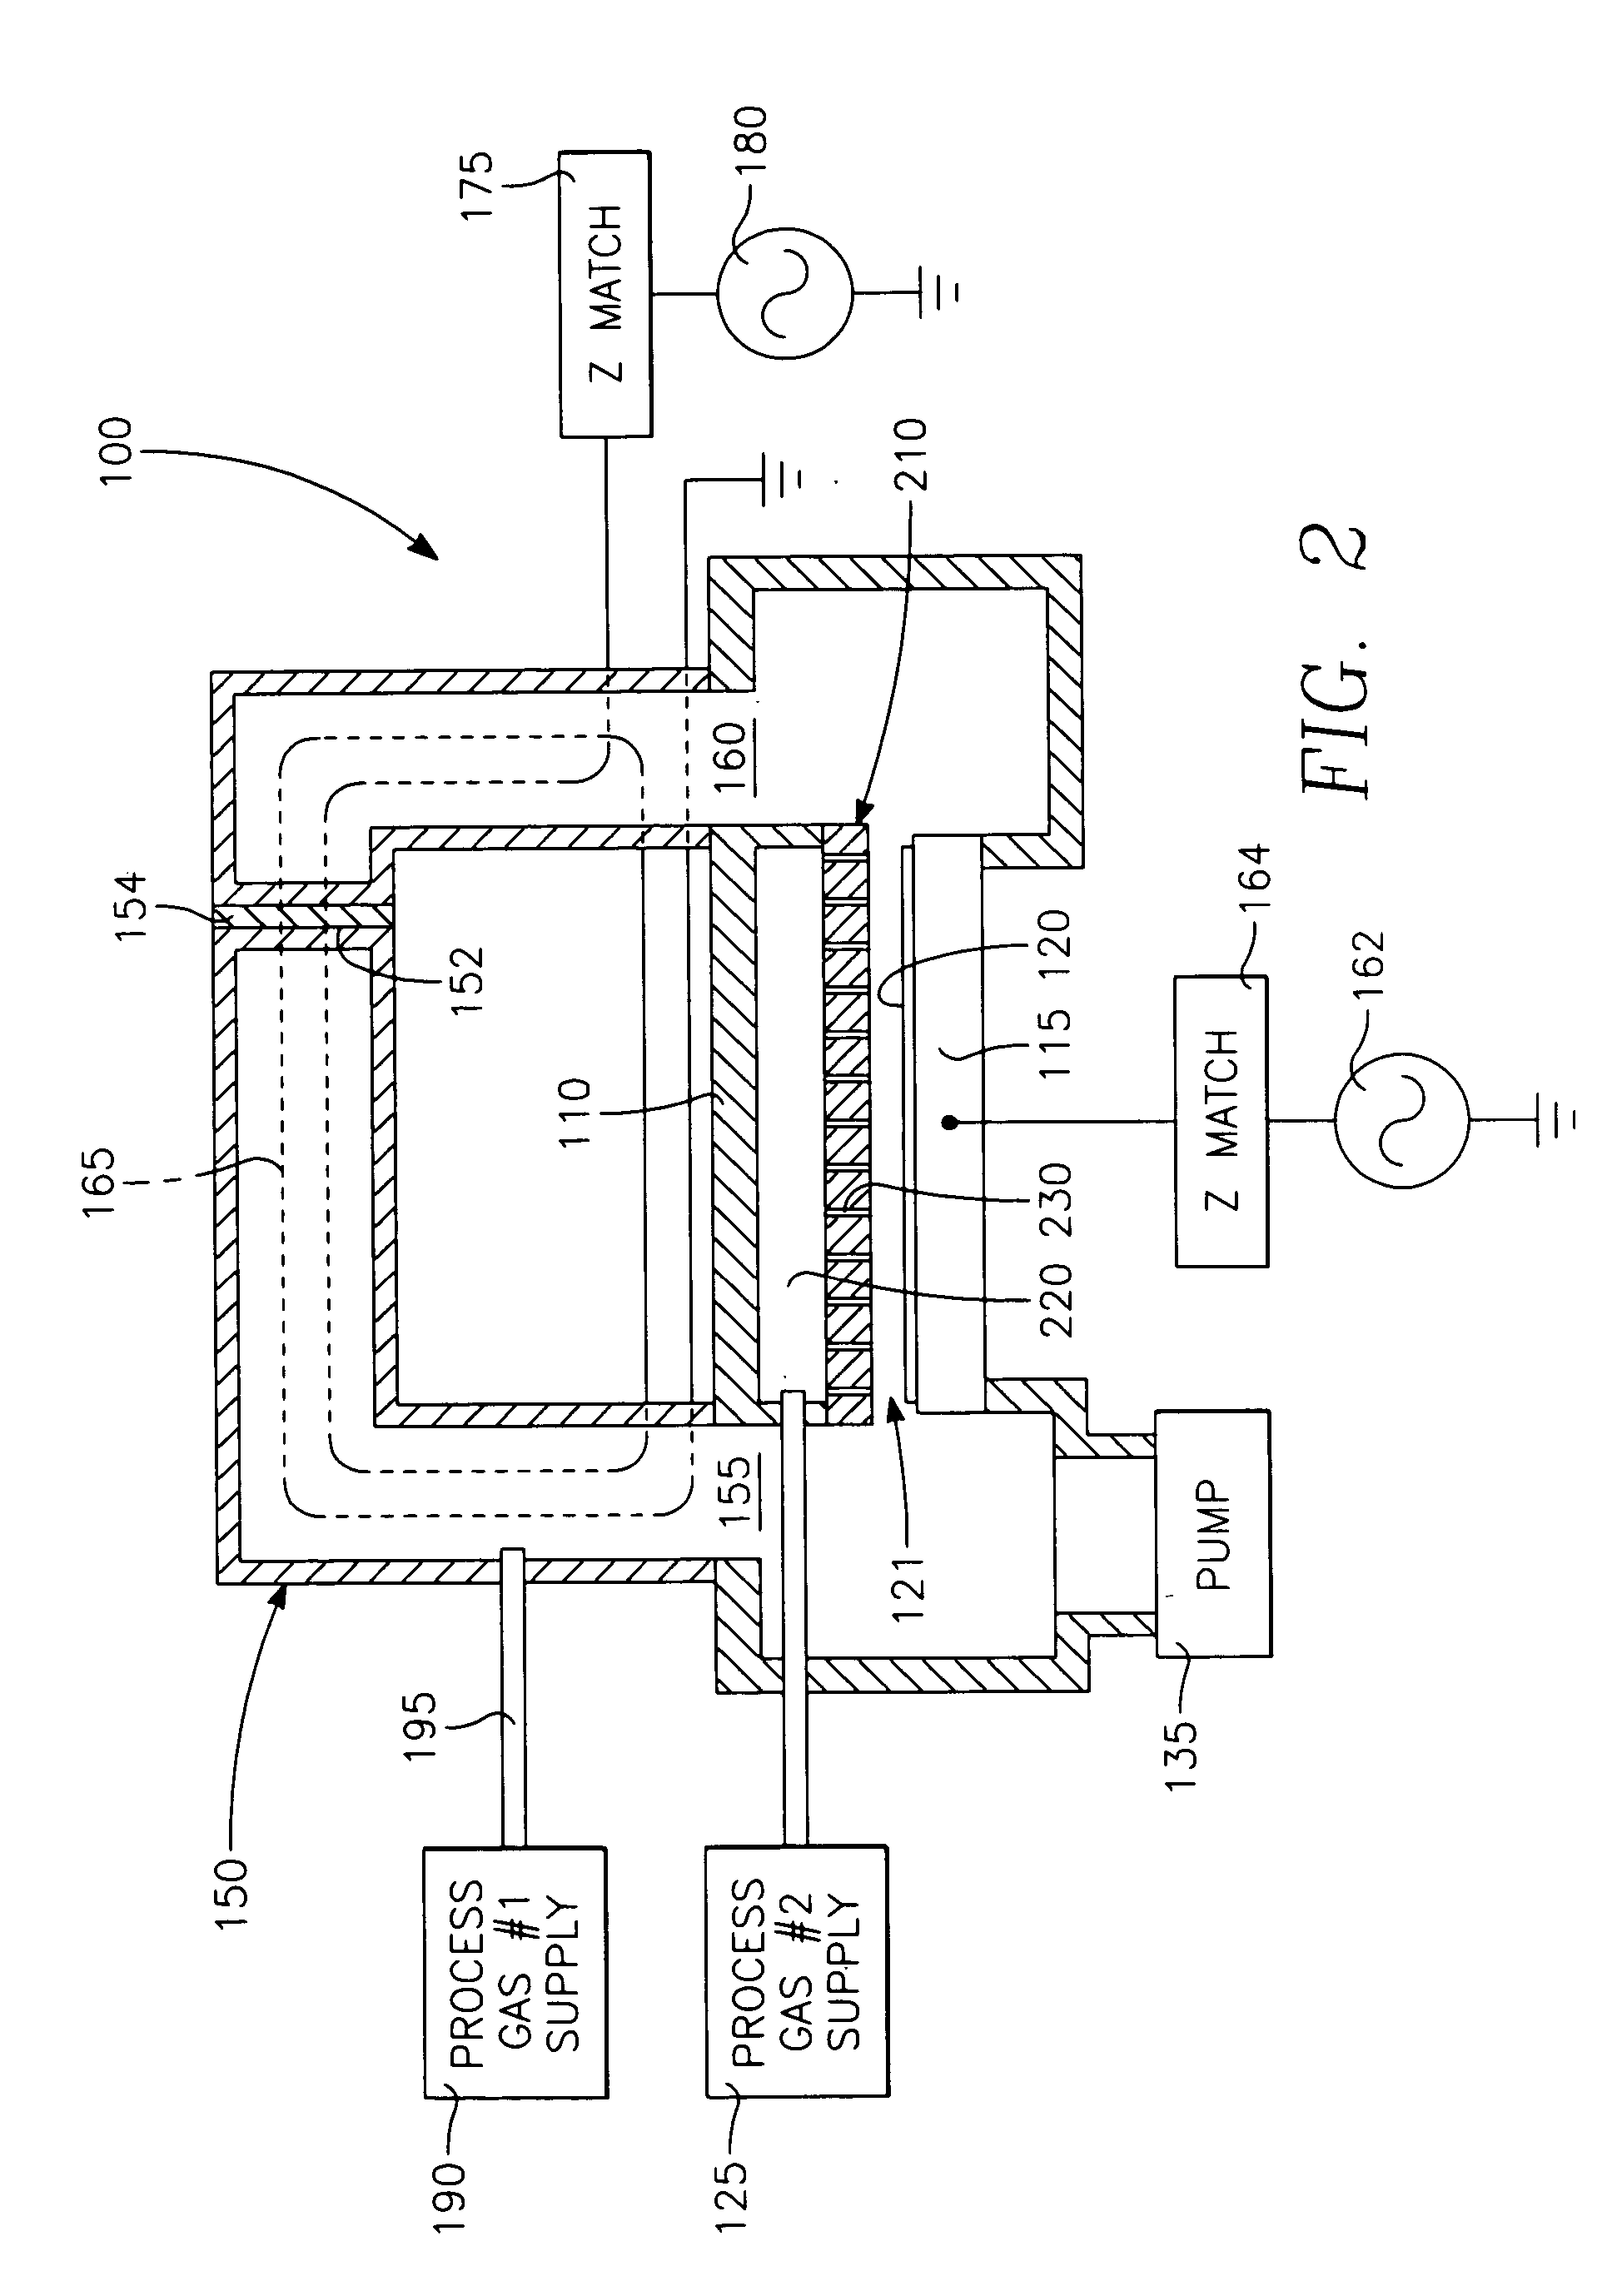 Semiconductor on insulator vertical transistor fabrication and doping process